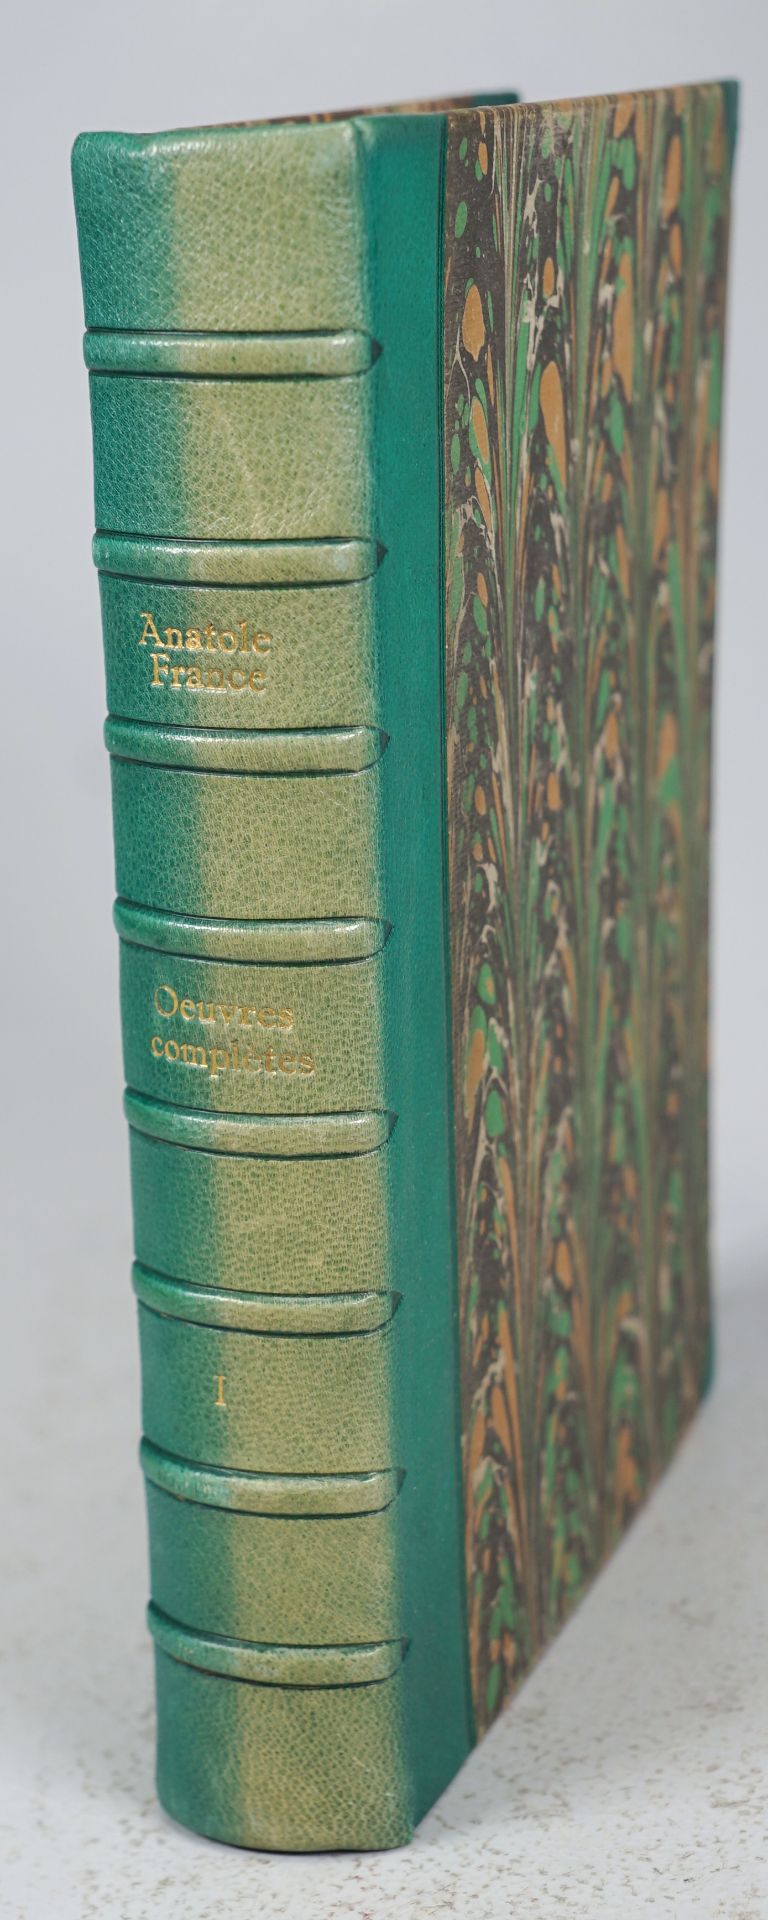 Anatole France : Oevre complete Tome 1-25 1925ff - Image 2 of 2